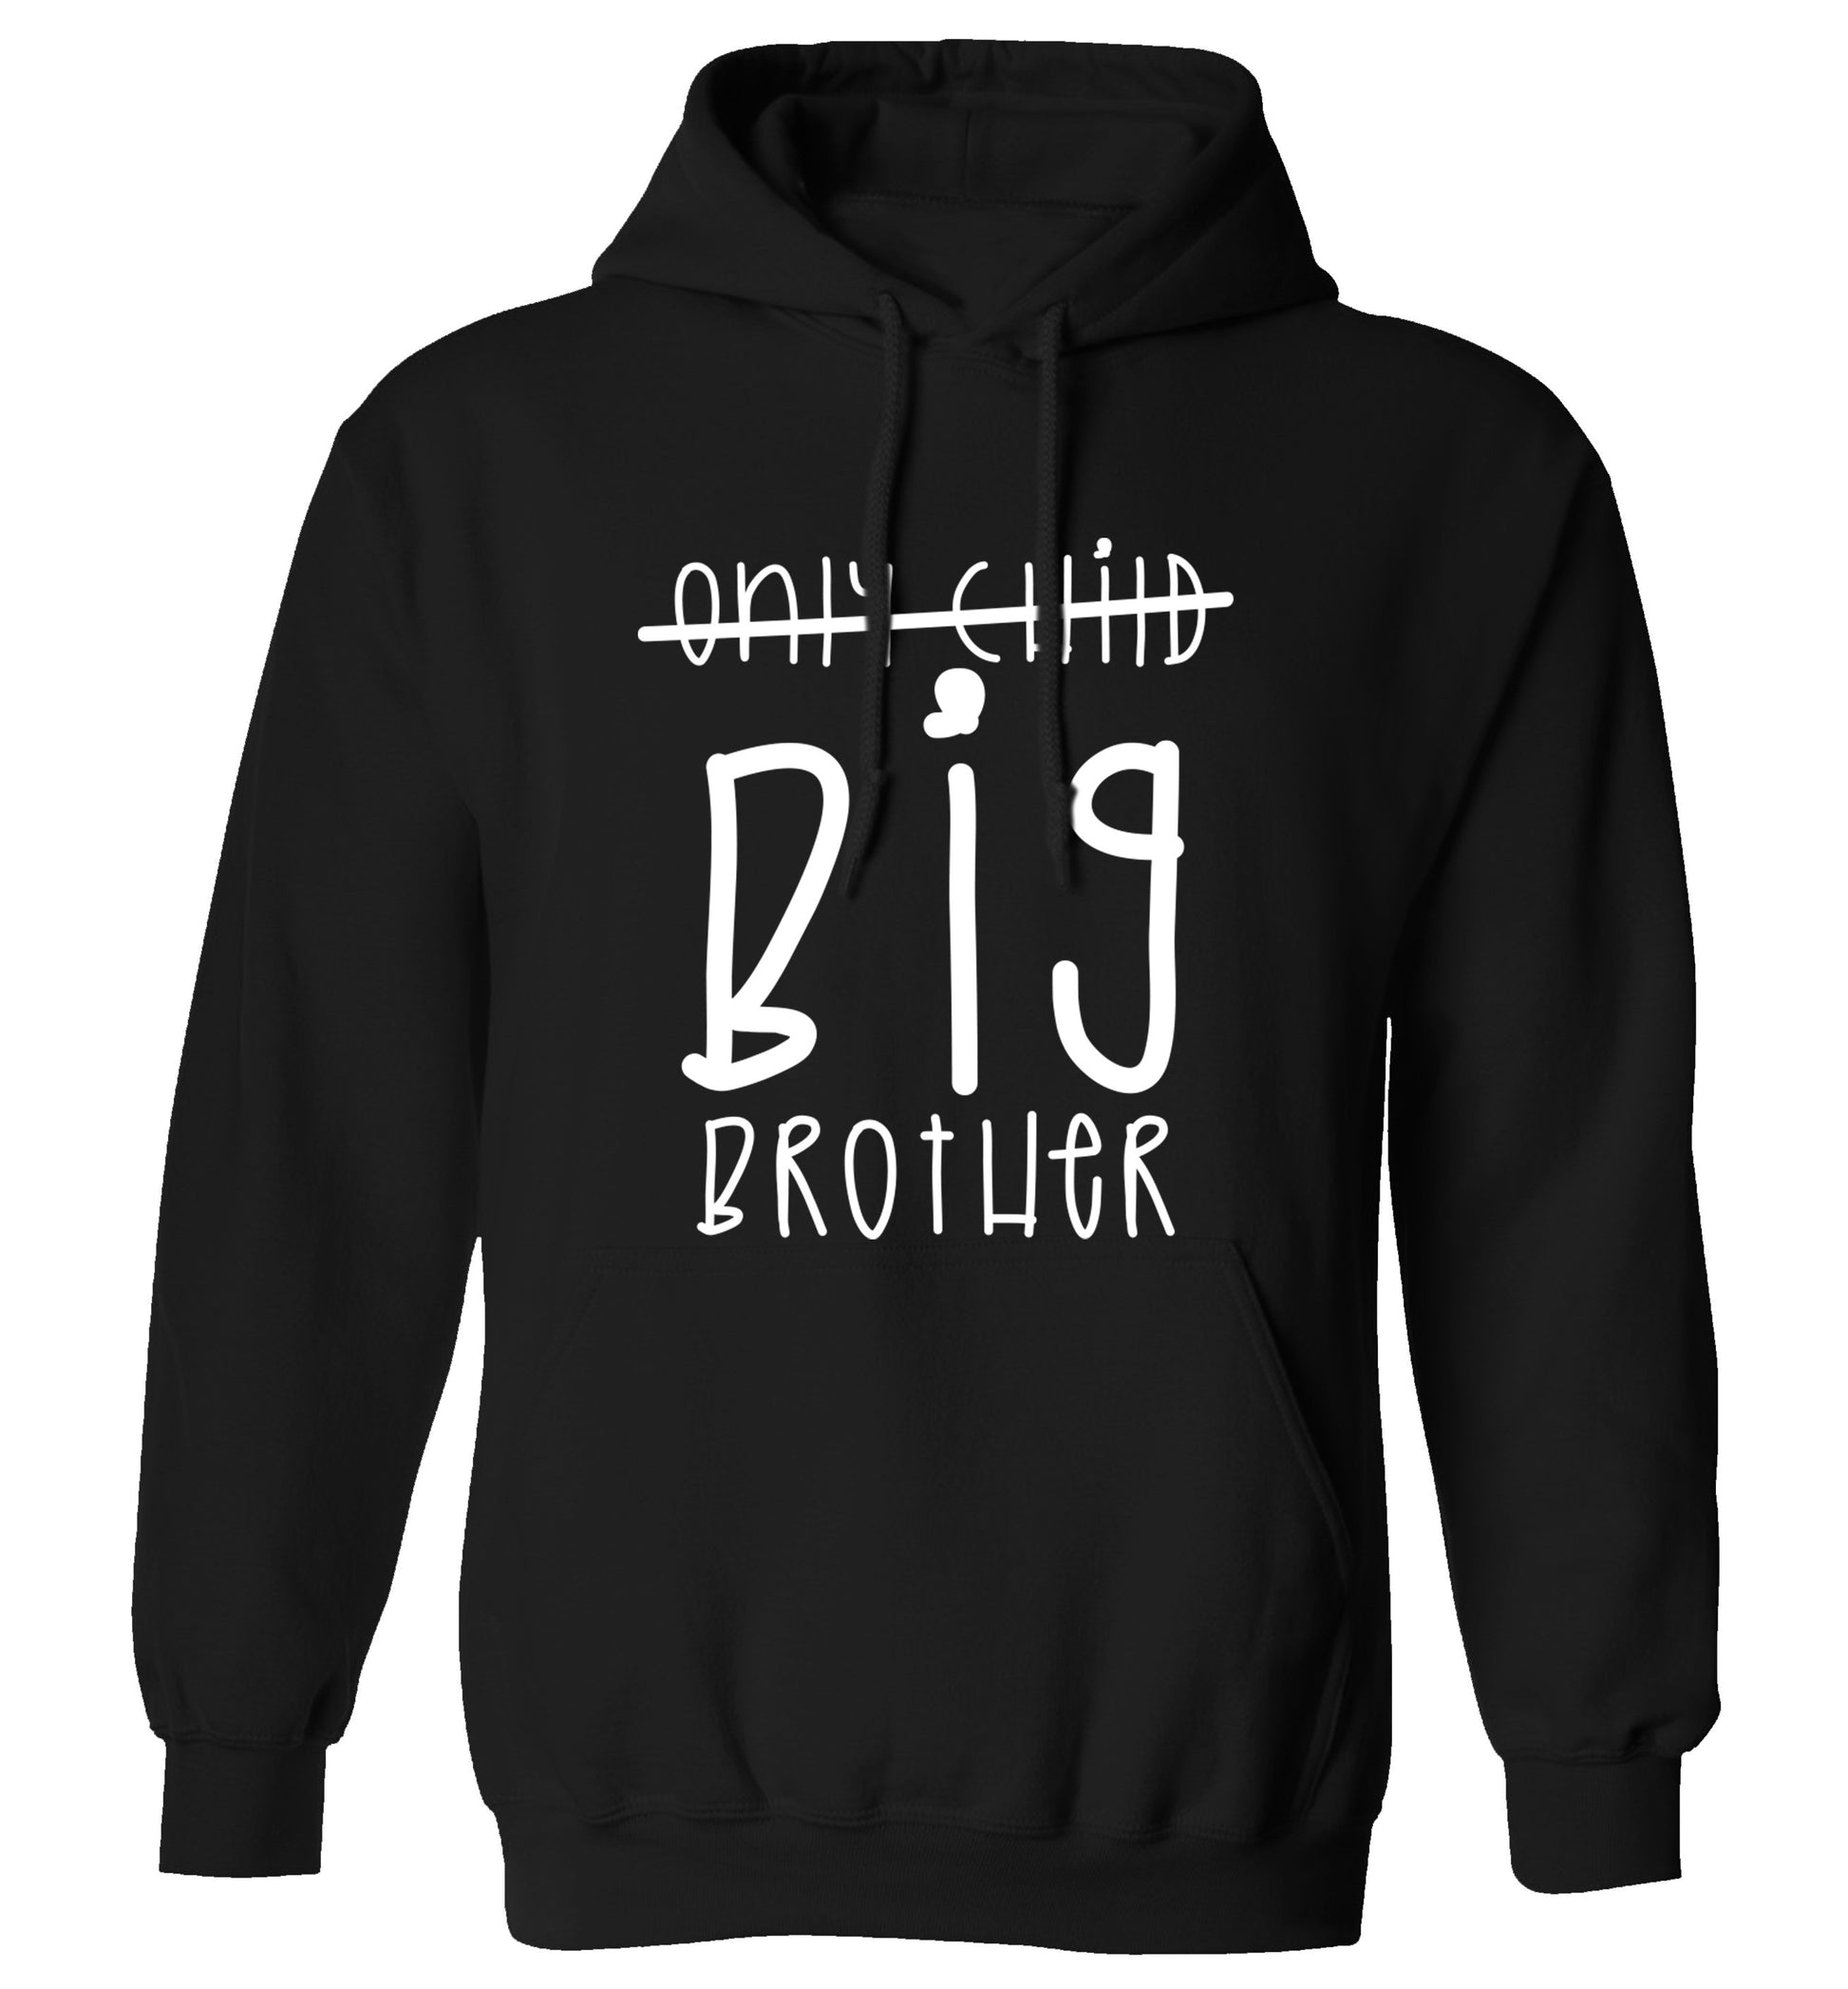 Only child big brother adults unisex black hoodie 2XL